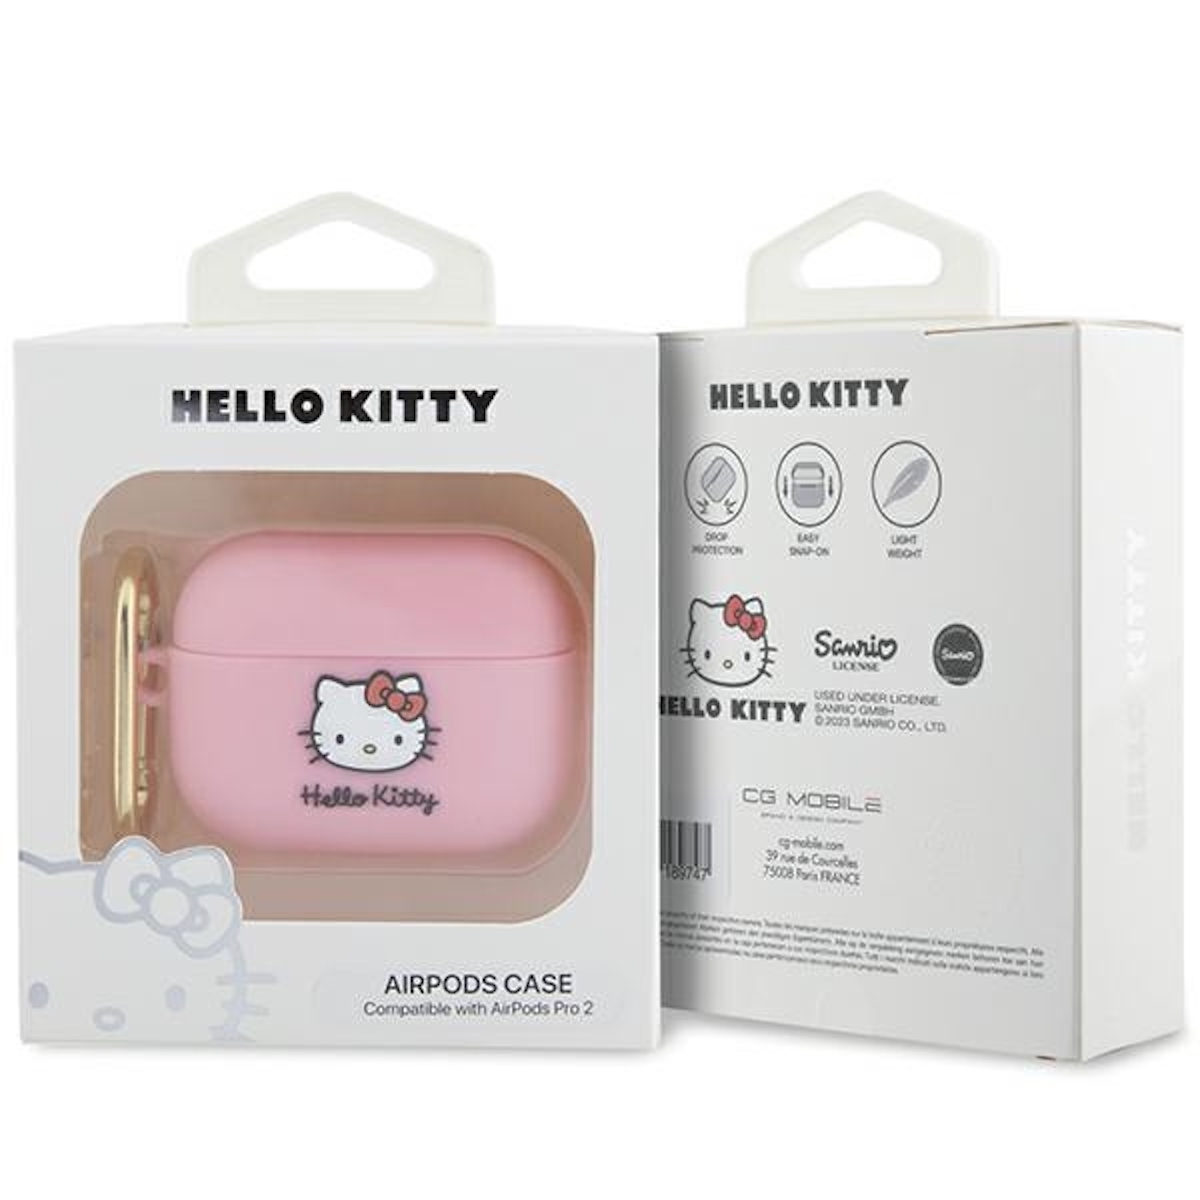 HELLO KITTY 2. Head BY Tasche Kitty Generation, Full Silikon 3D AirPods Schutzhülle, Pro Cover, AirPods Apple, Hülle CHEFMADE Rosa